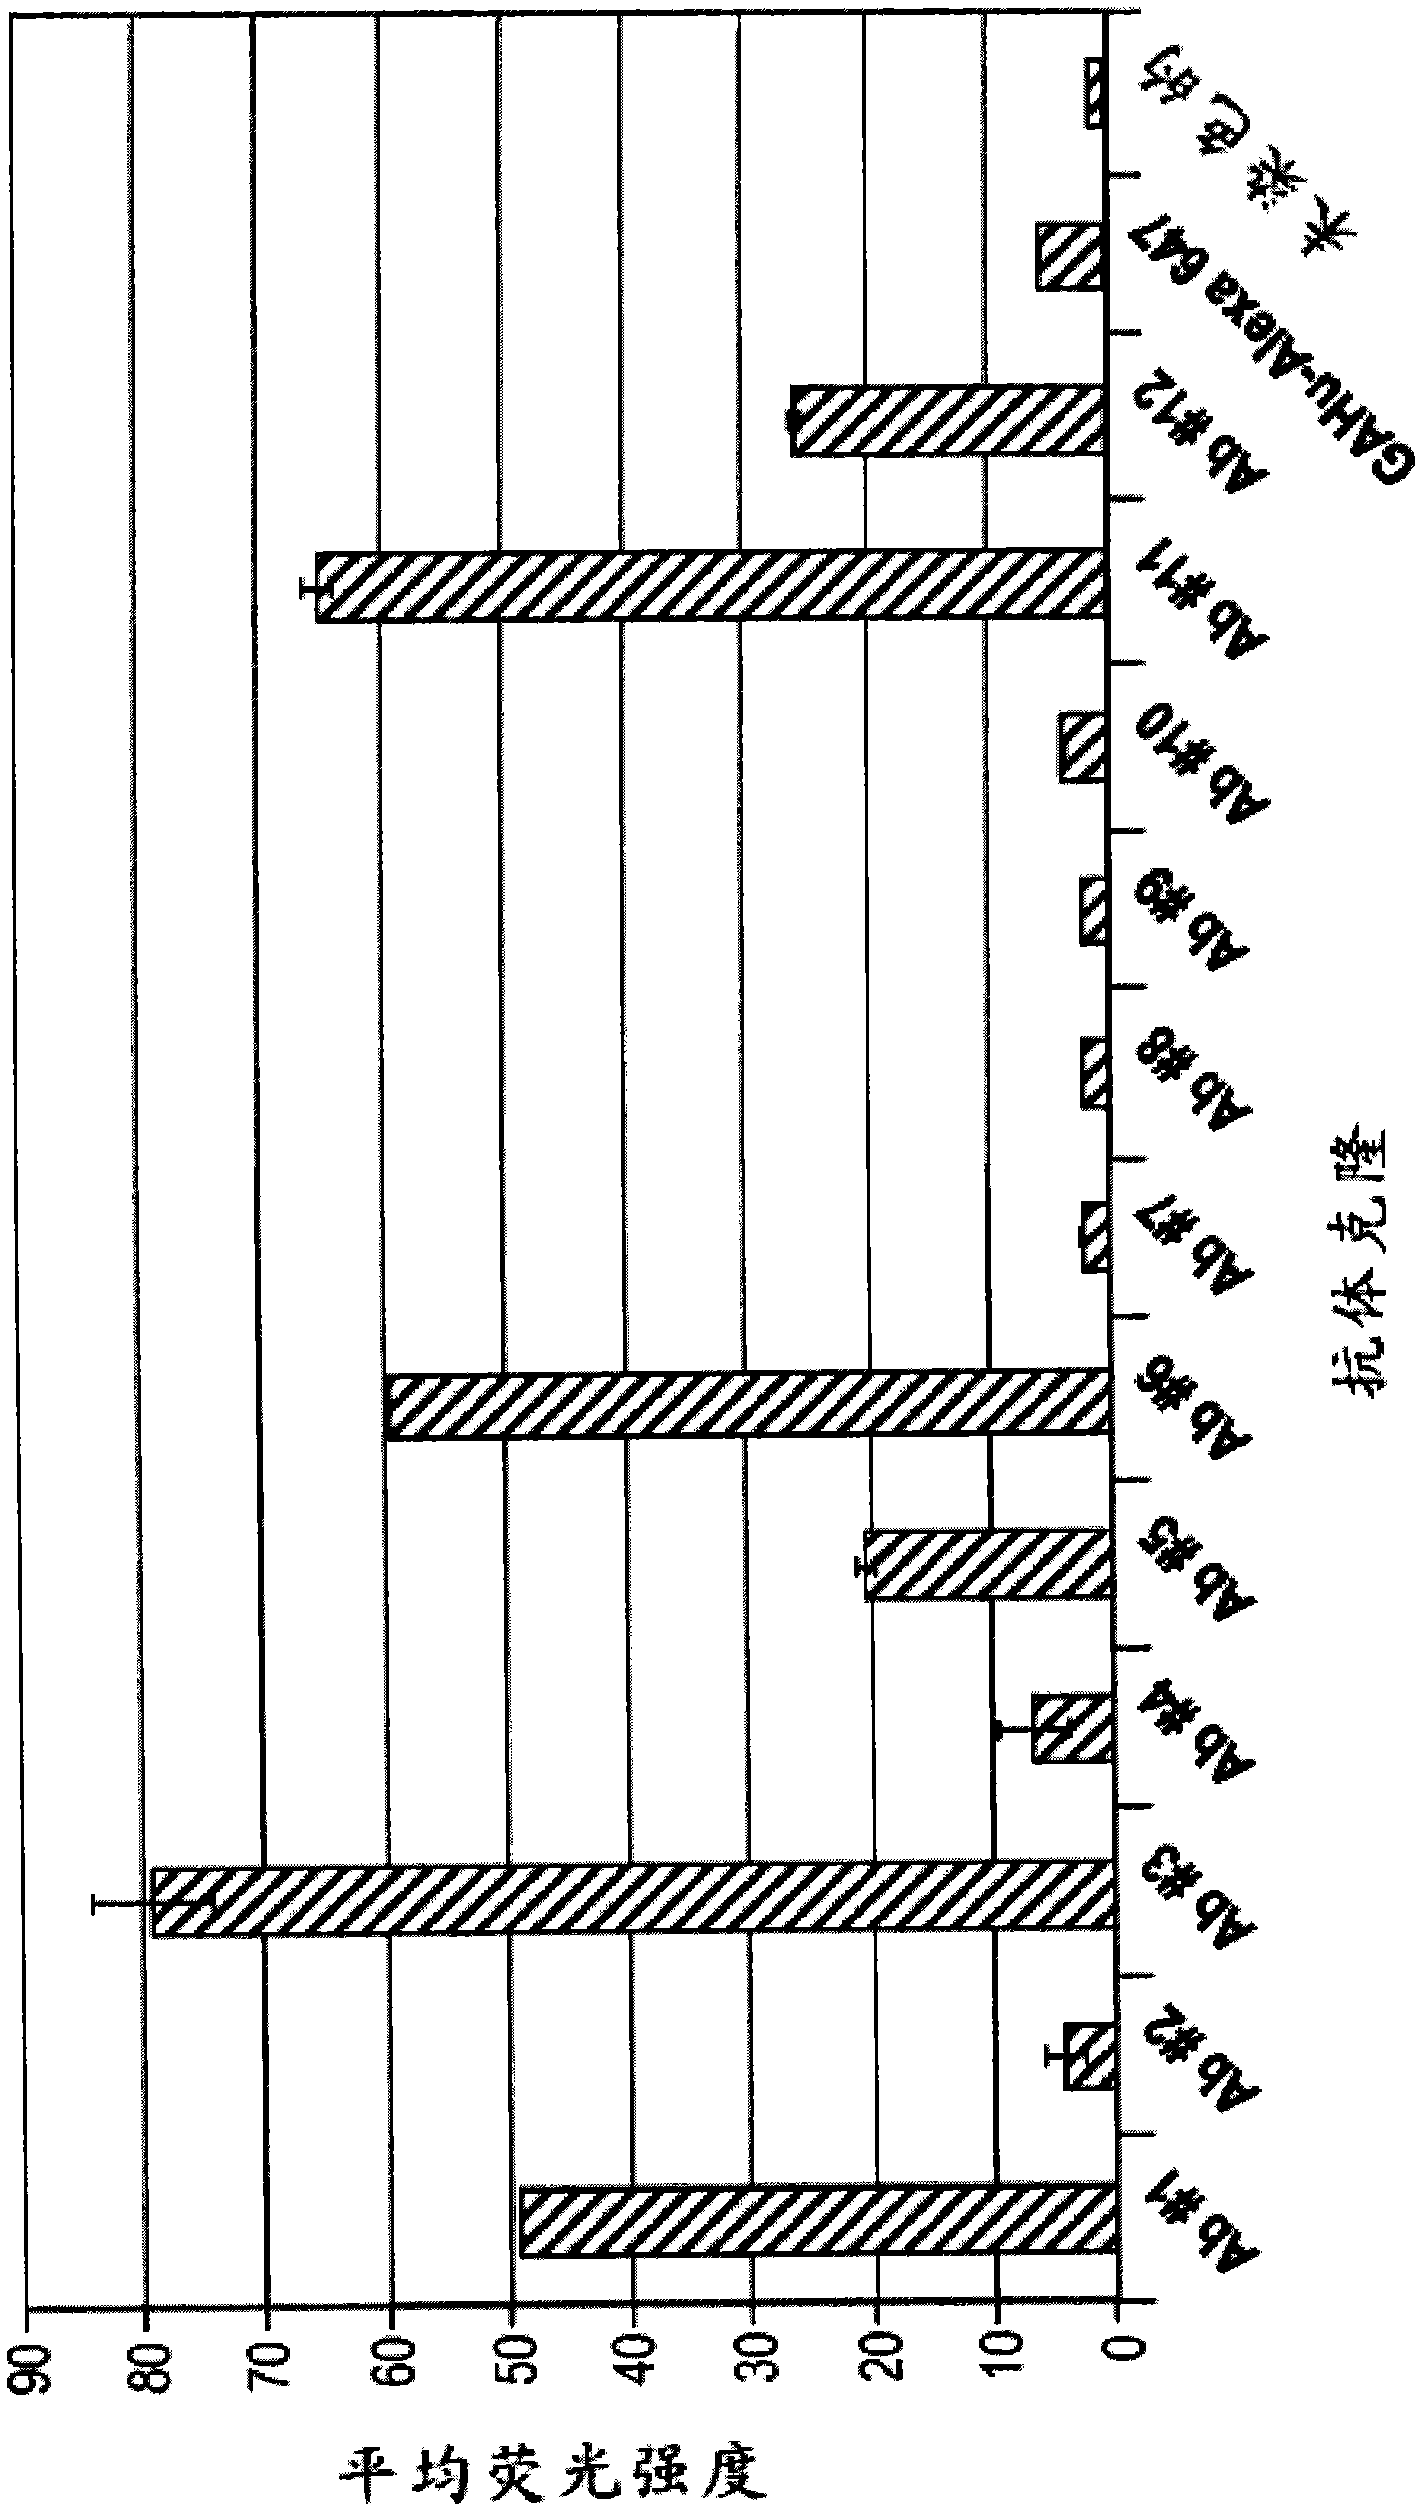 Antibodies against the ectodomain of ErbB3 and uses thereof